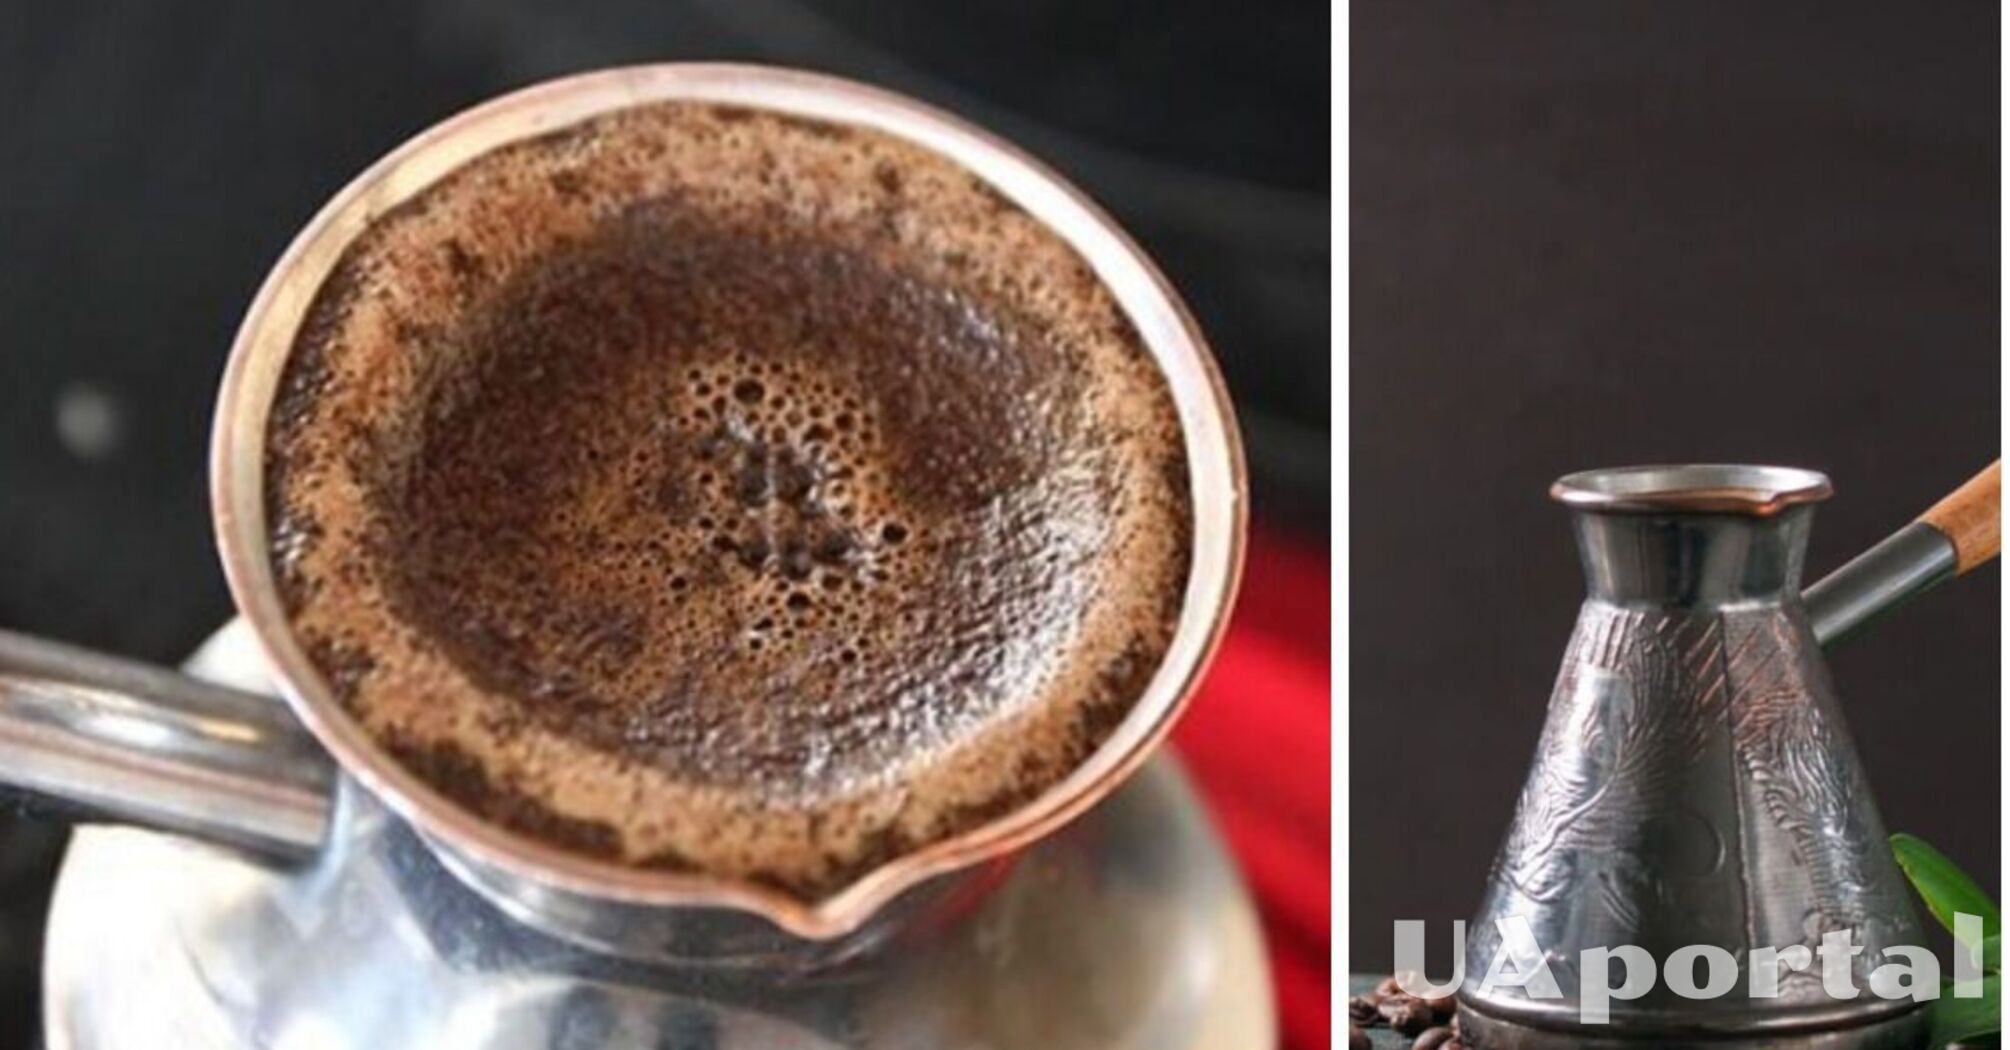 How to make coffee in a cezve correctly